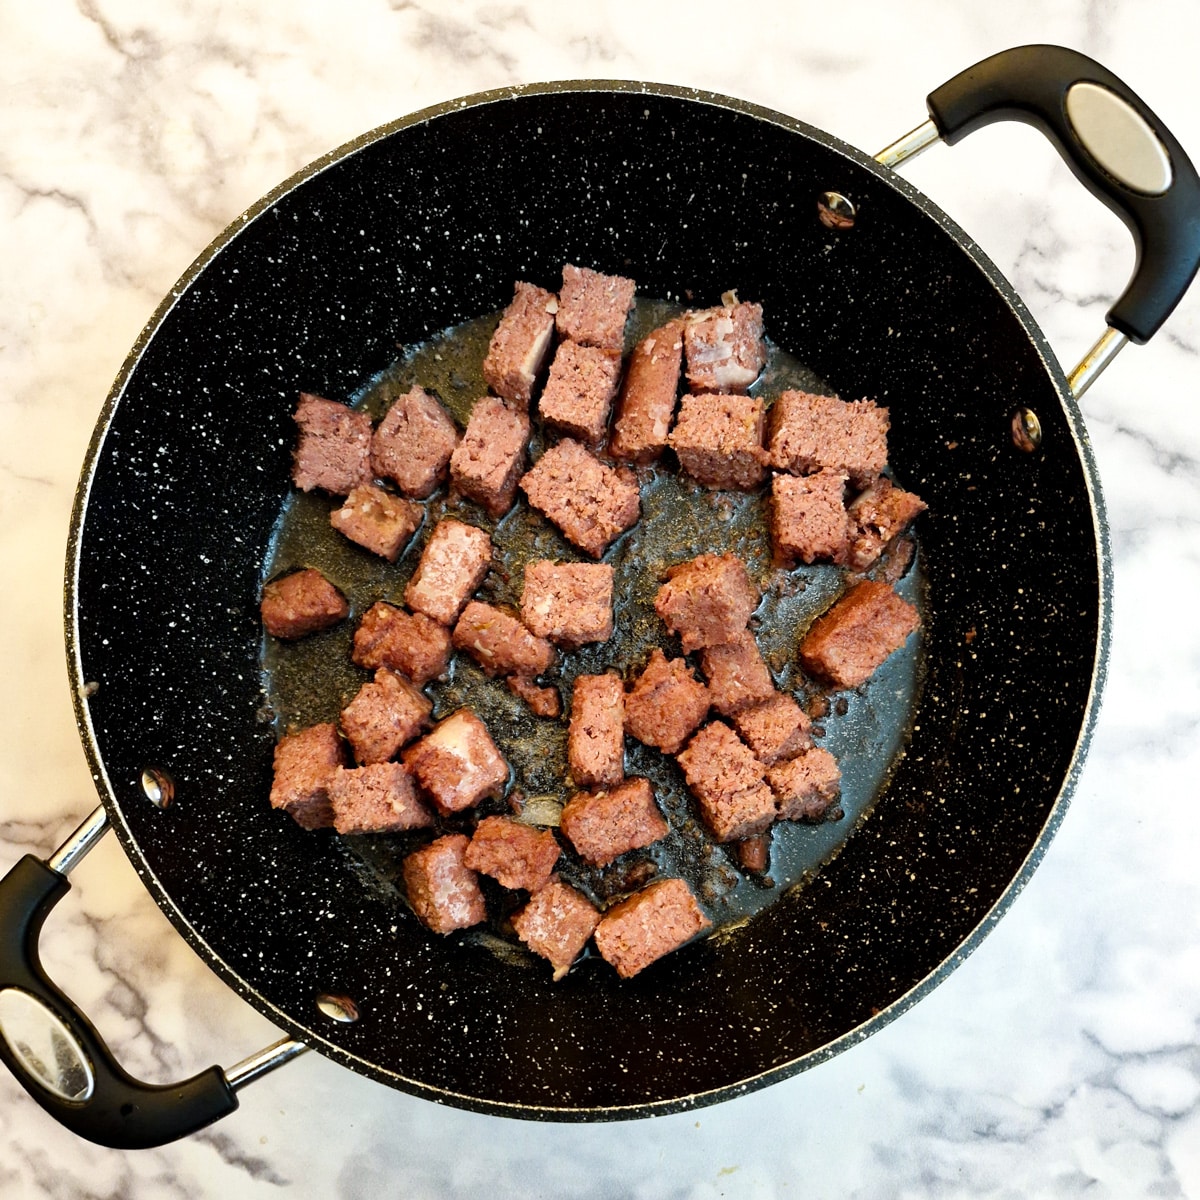 Pieces of corned beef in a frying pan.